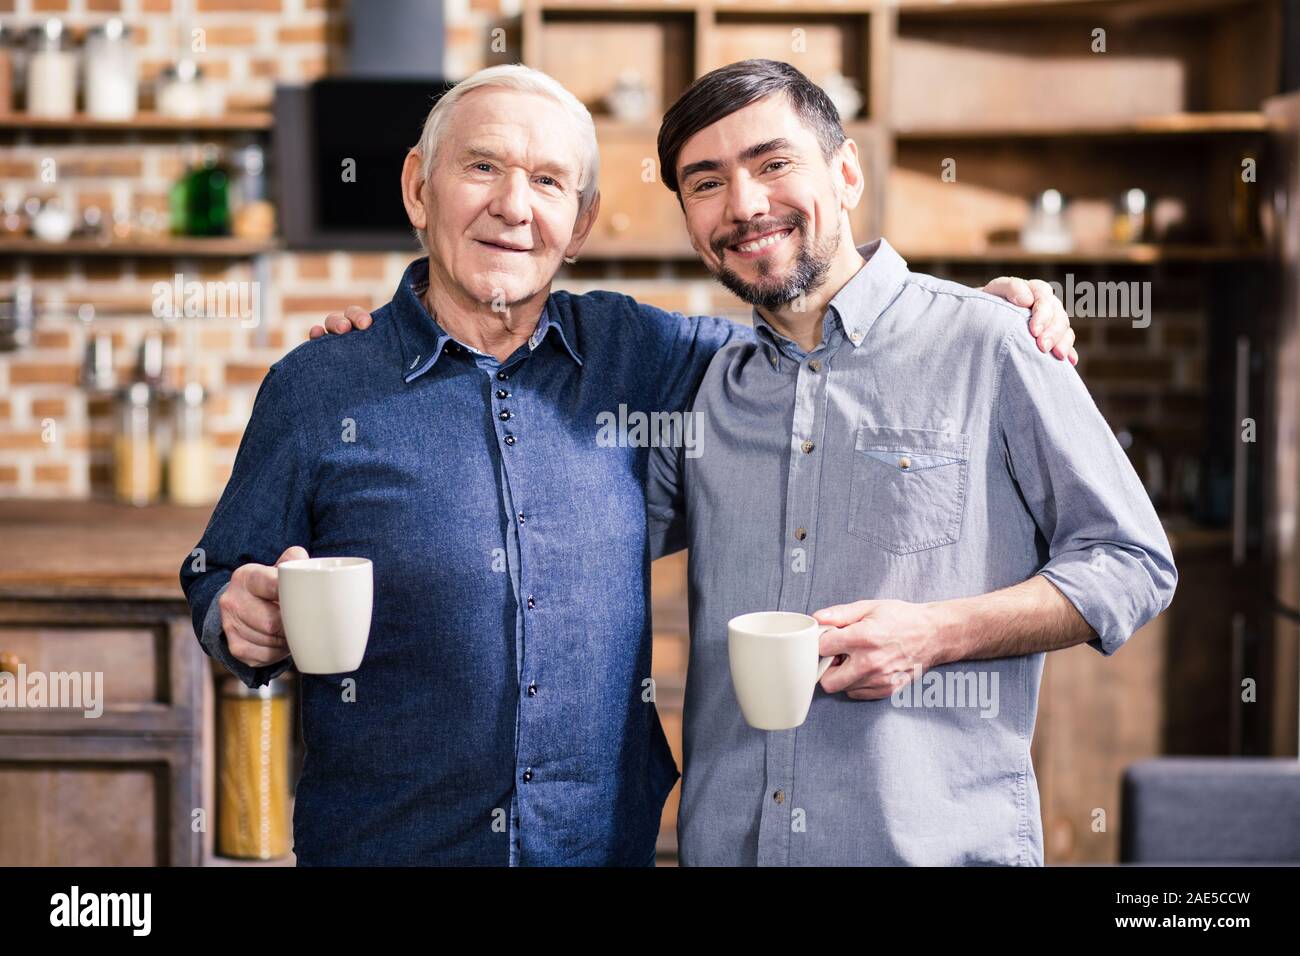 Waist up of cheerful man and his son drinking coffee Stock Photo